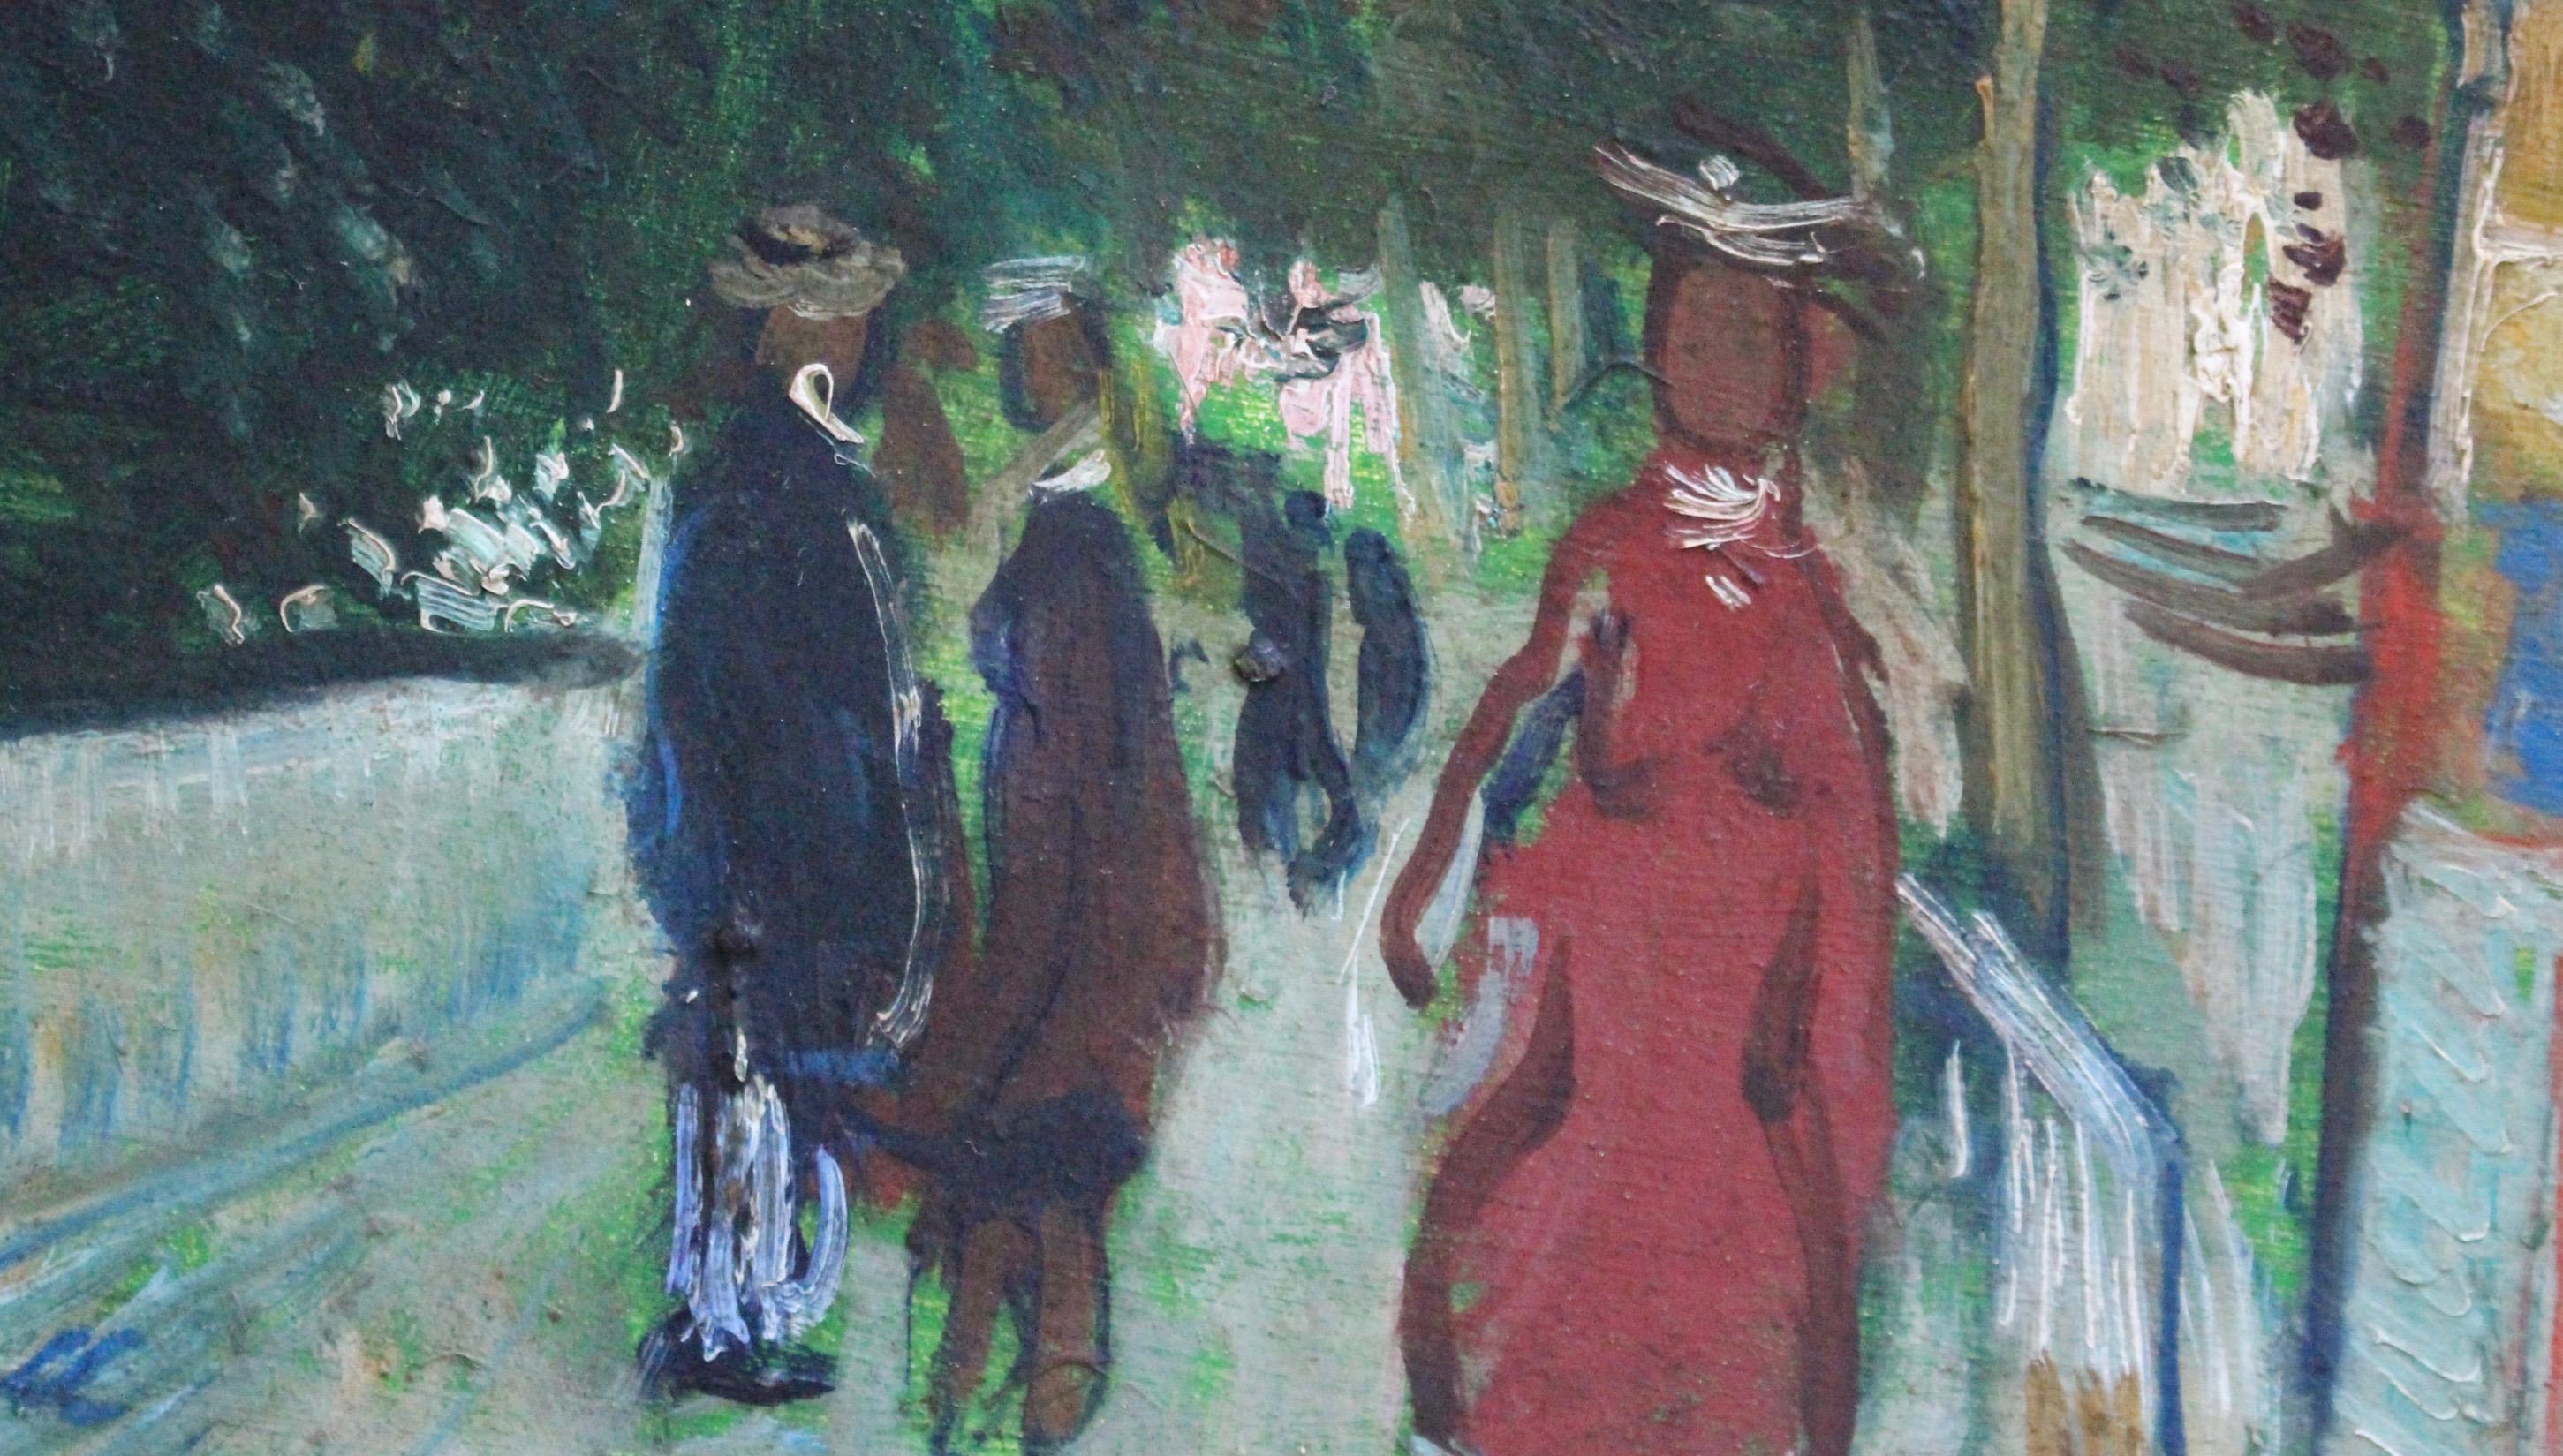 'Les Grands Boulevards - Paris', oil on board, by François Gall (circa 1950s). An impressionist depiction of Parisians promenading at dusk. The remaining light of the day peeks through the trees softly illuminating strollers passing by one of the